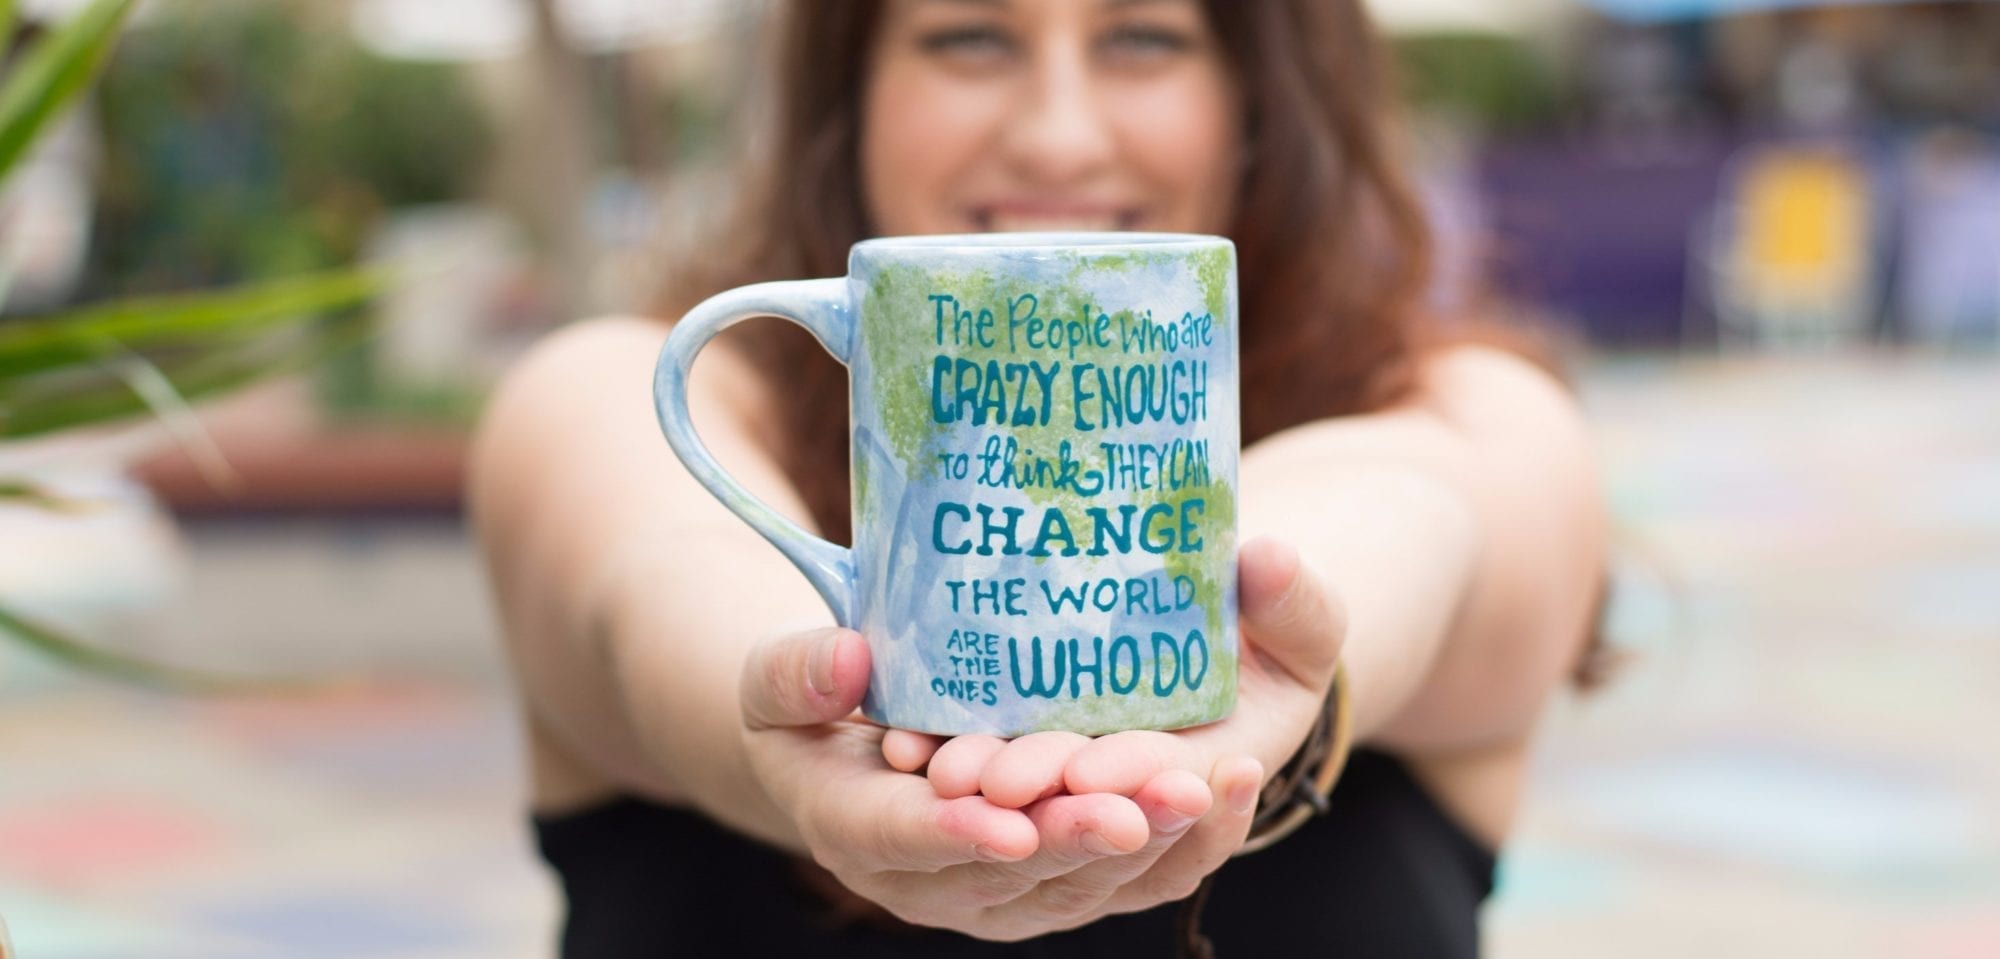 Average Advocate Make a difference in the world mug